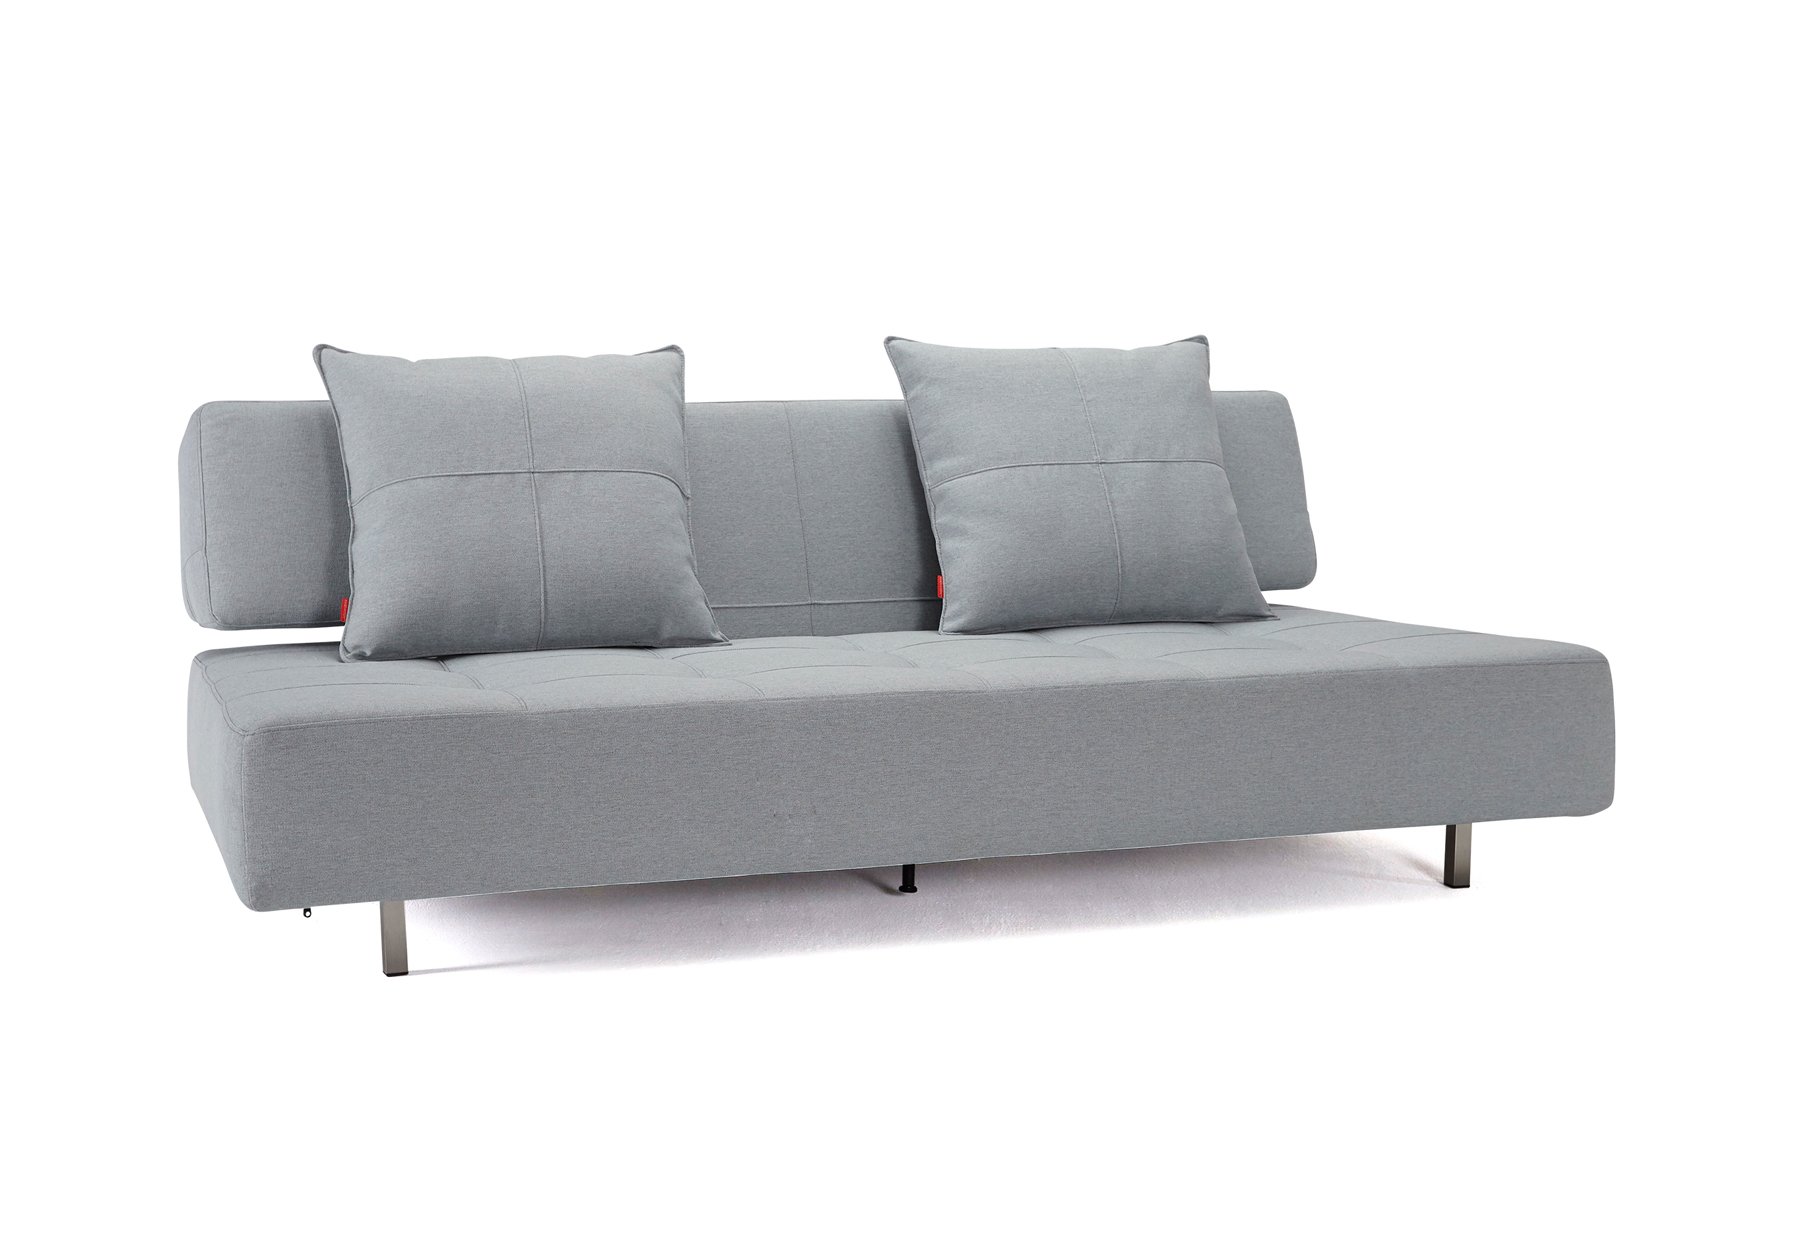 long horn deluxe excess sofa bed